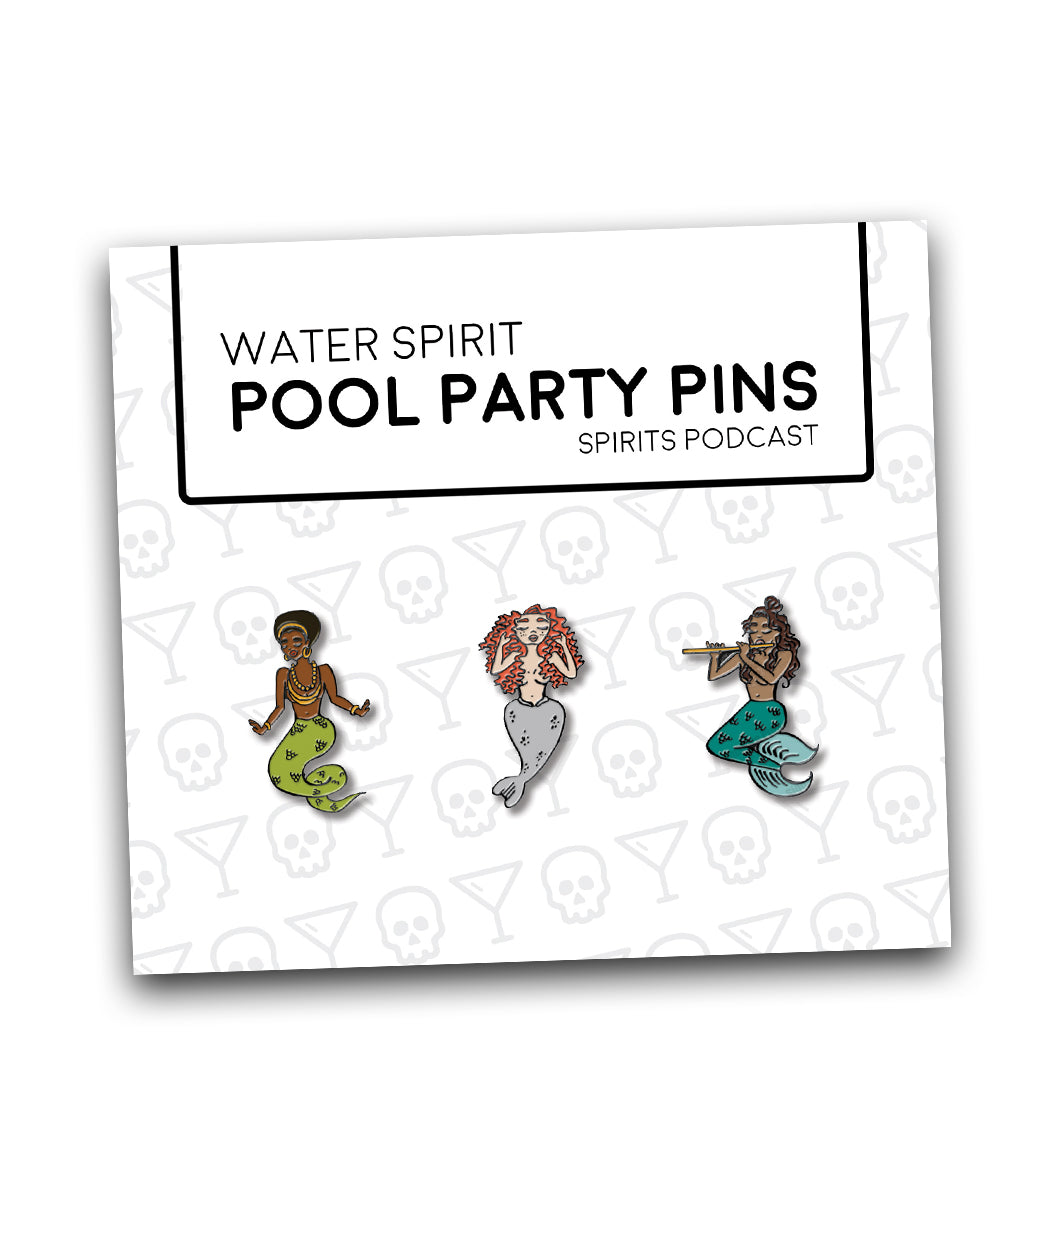 Three different mermaid pins on a card. The far left is a dark skinned woman with dark hair and gold jewelry with a green tail. Middle is a lightskinned woman with red hair and a gray tail. Third is a dark skinned woman with dark hair playing the flute with a blue tail - from Spirits